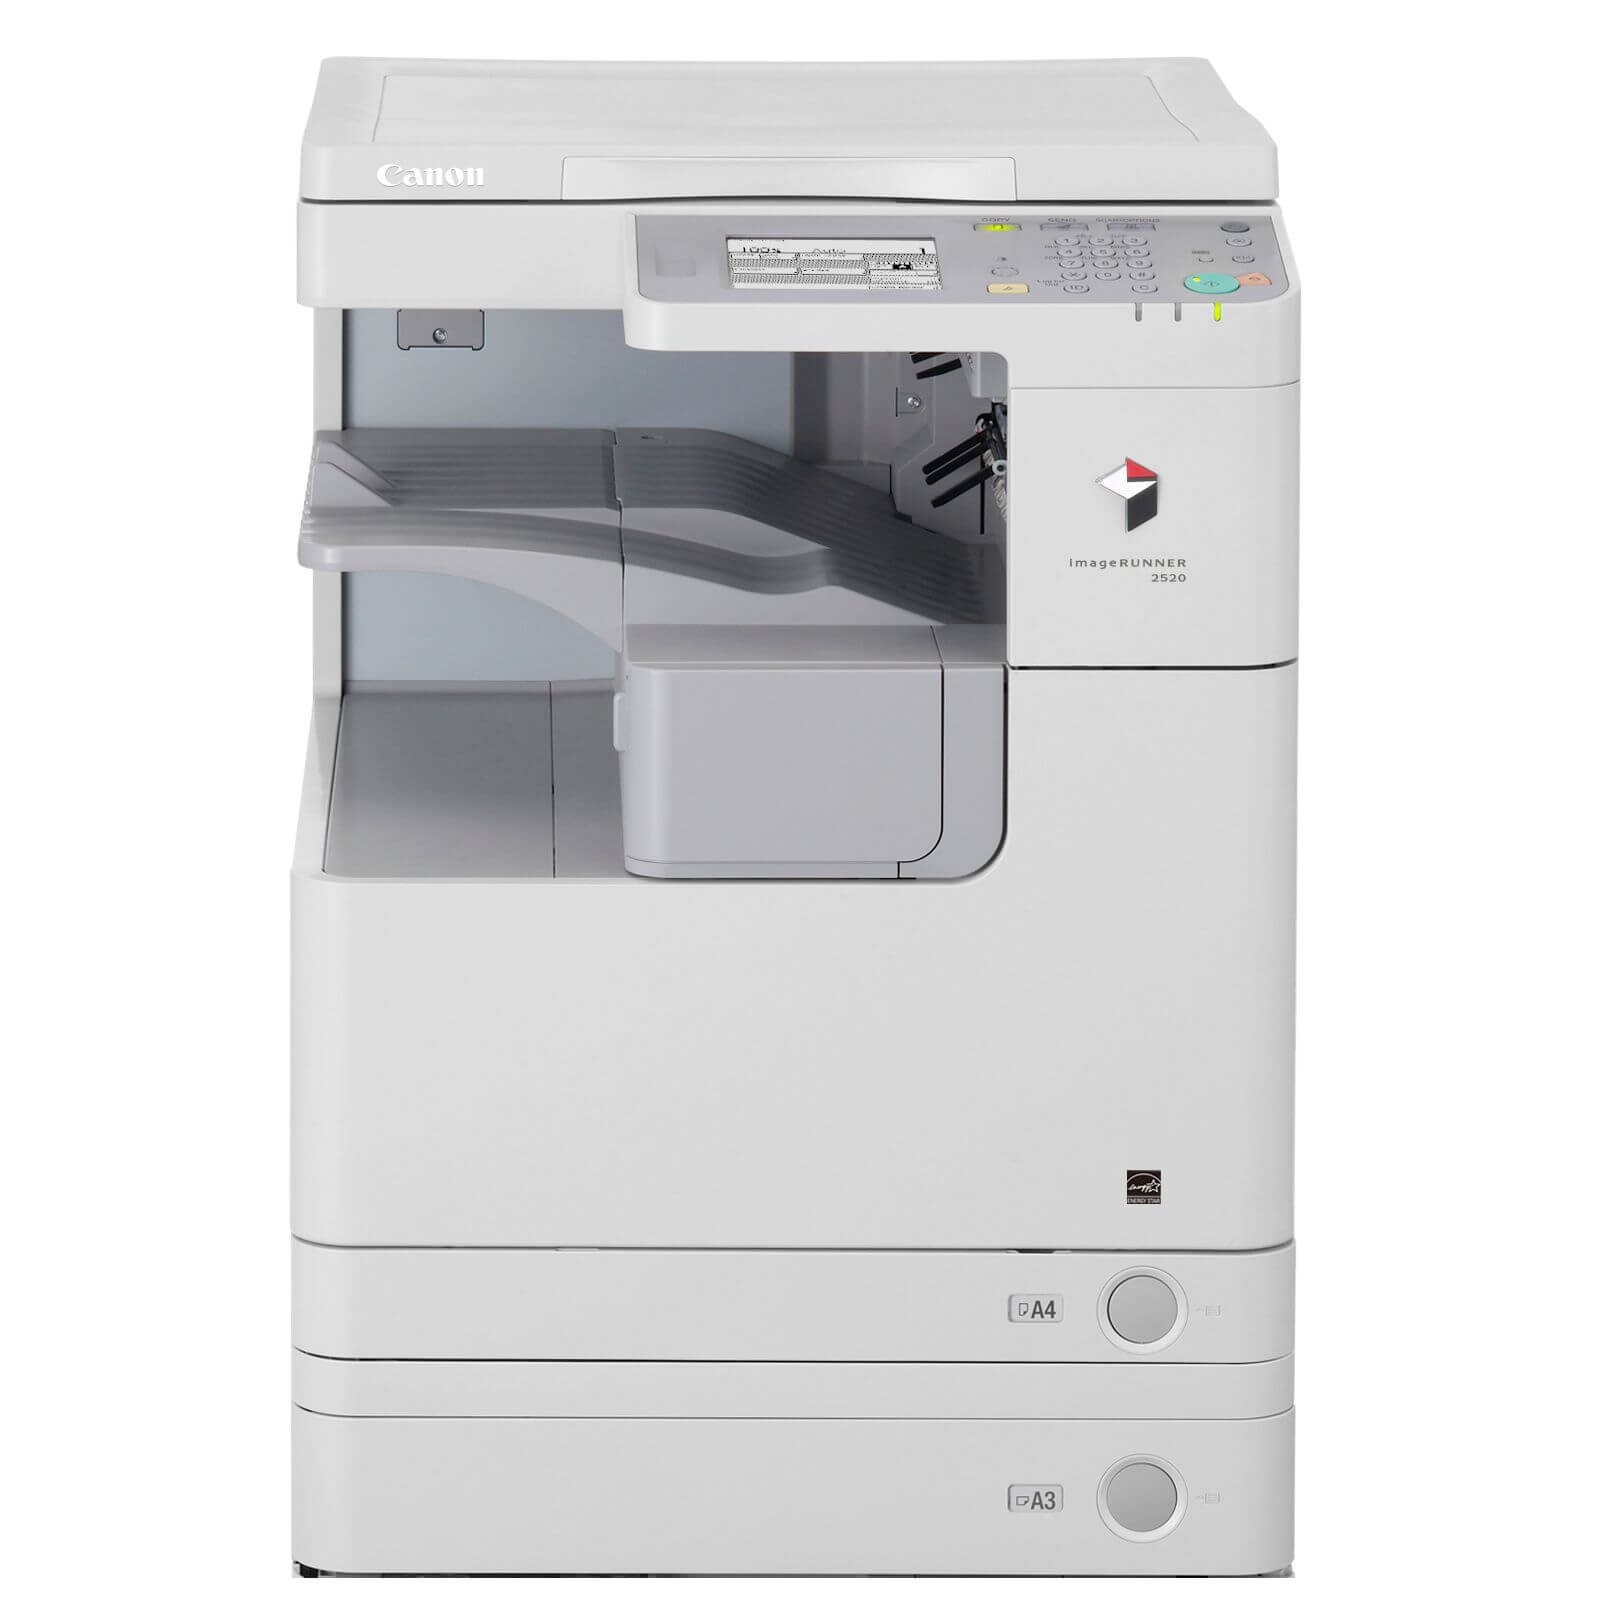  Multifunctional laser monocrom Canon imageRunner 2520, A3 